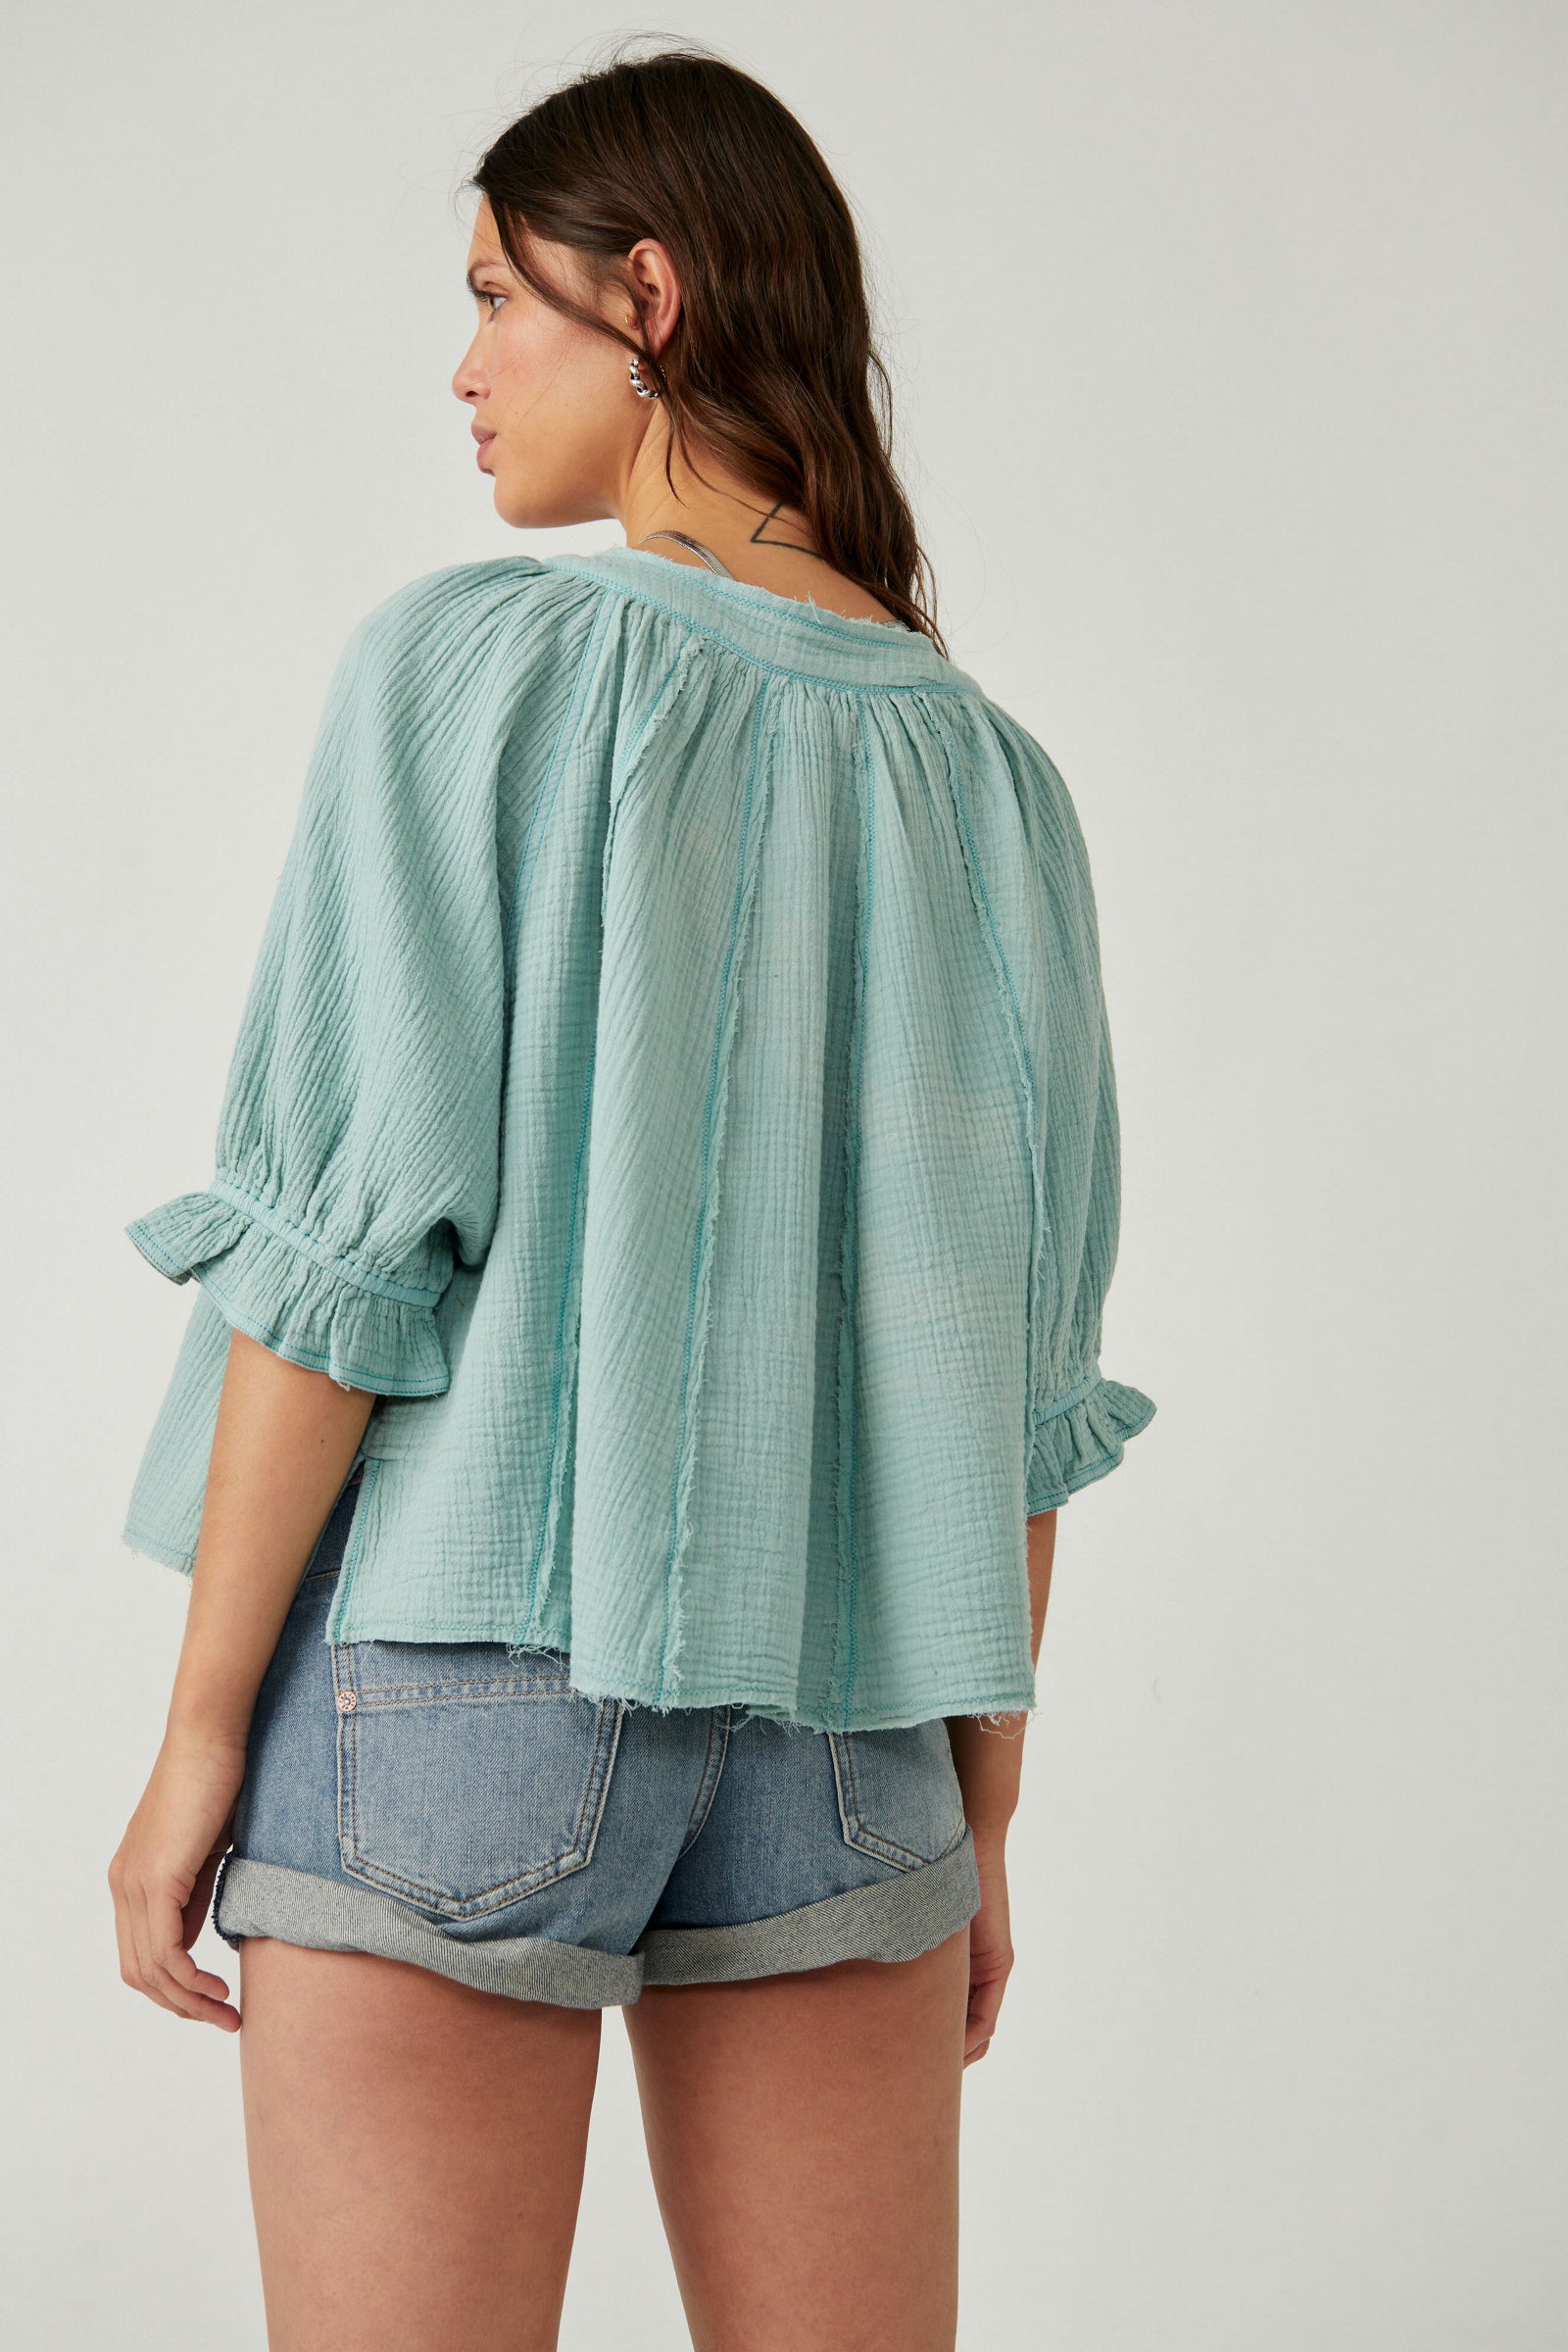 FREE PEOPLE LUCY SOLD SWING TOP IN BLUE SURF